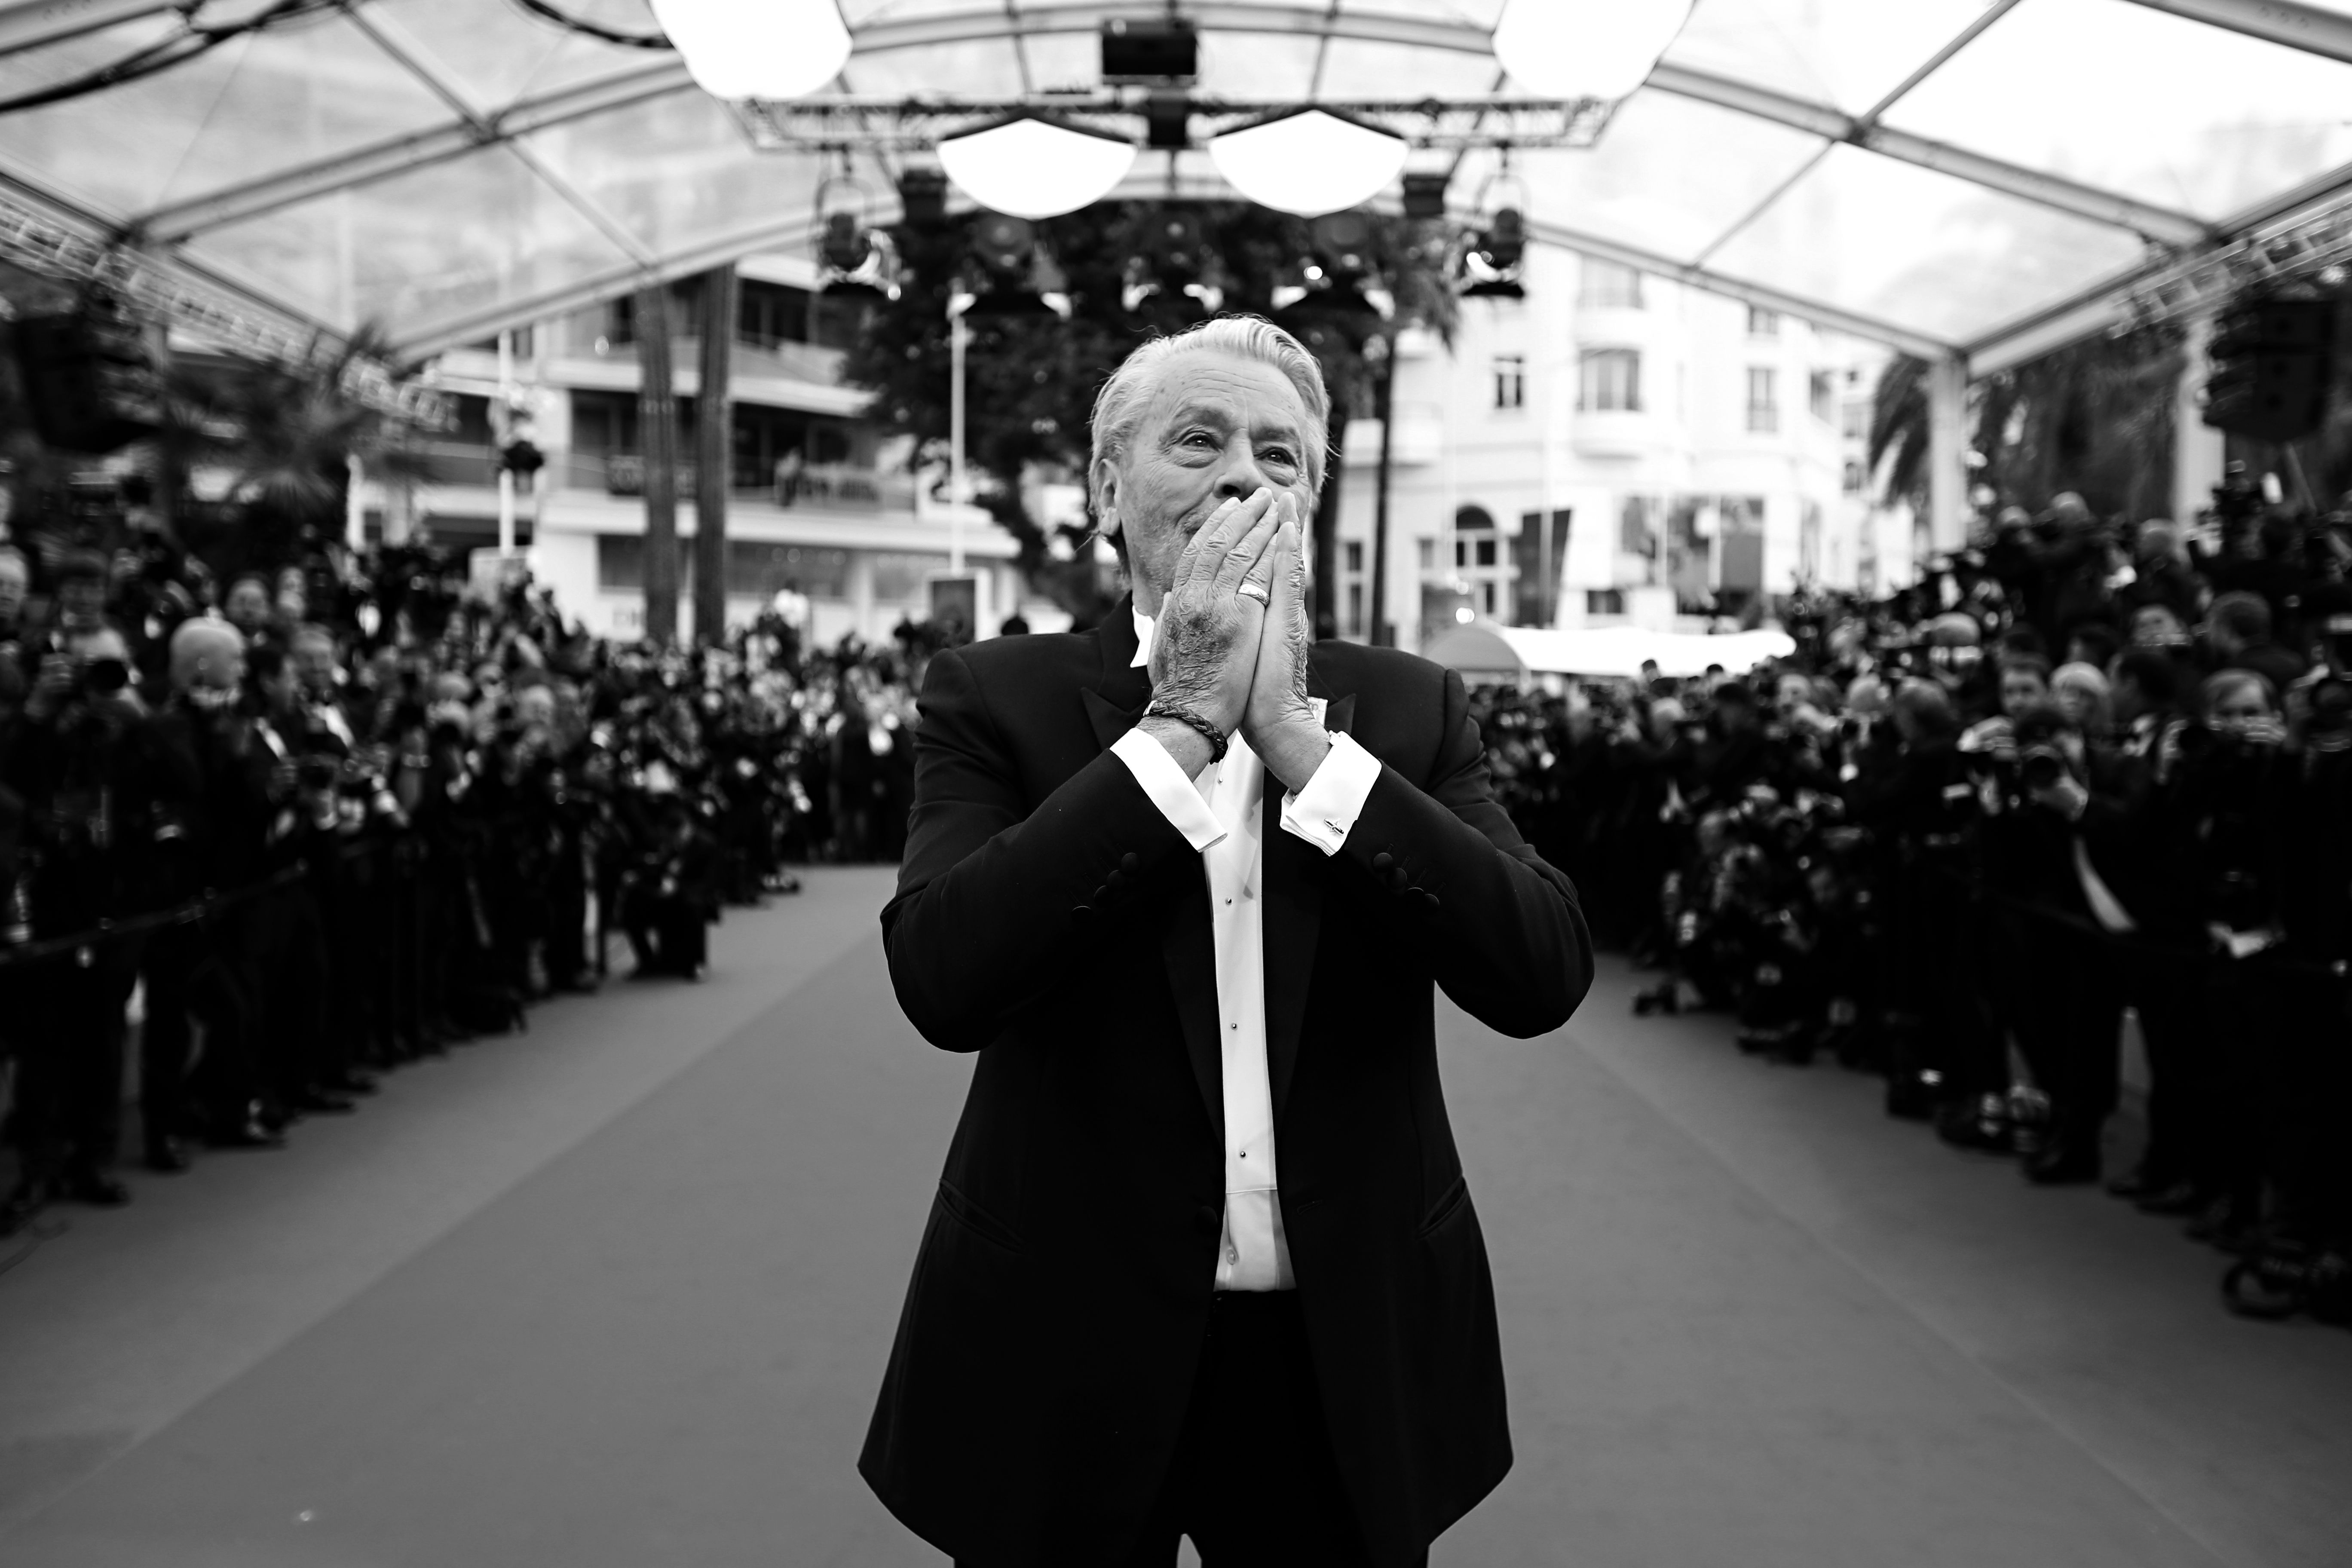 Alain Delon at the 72nd edition of the Cannes Film Festival in Cannes, France on May 19, 2019 | Source: Getty Images